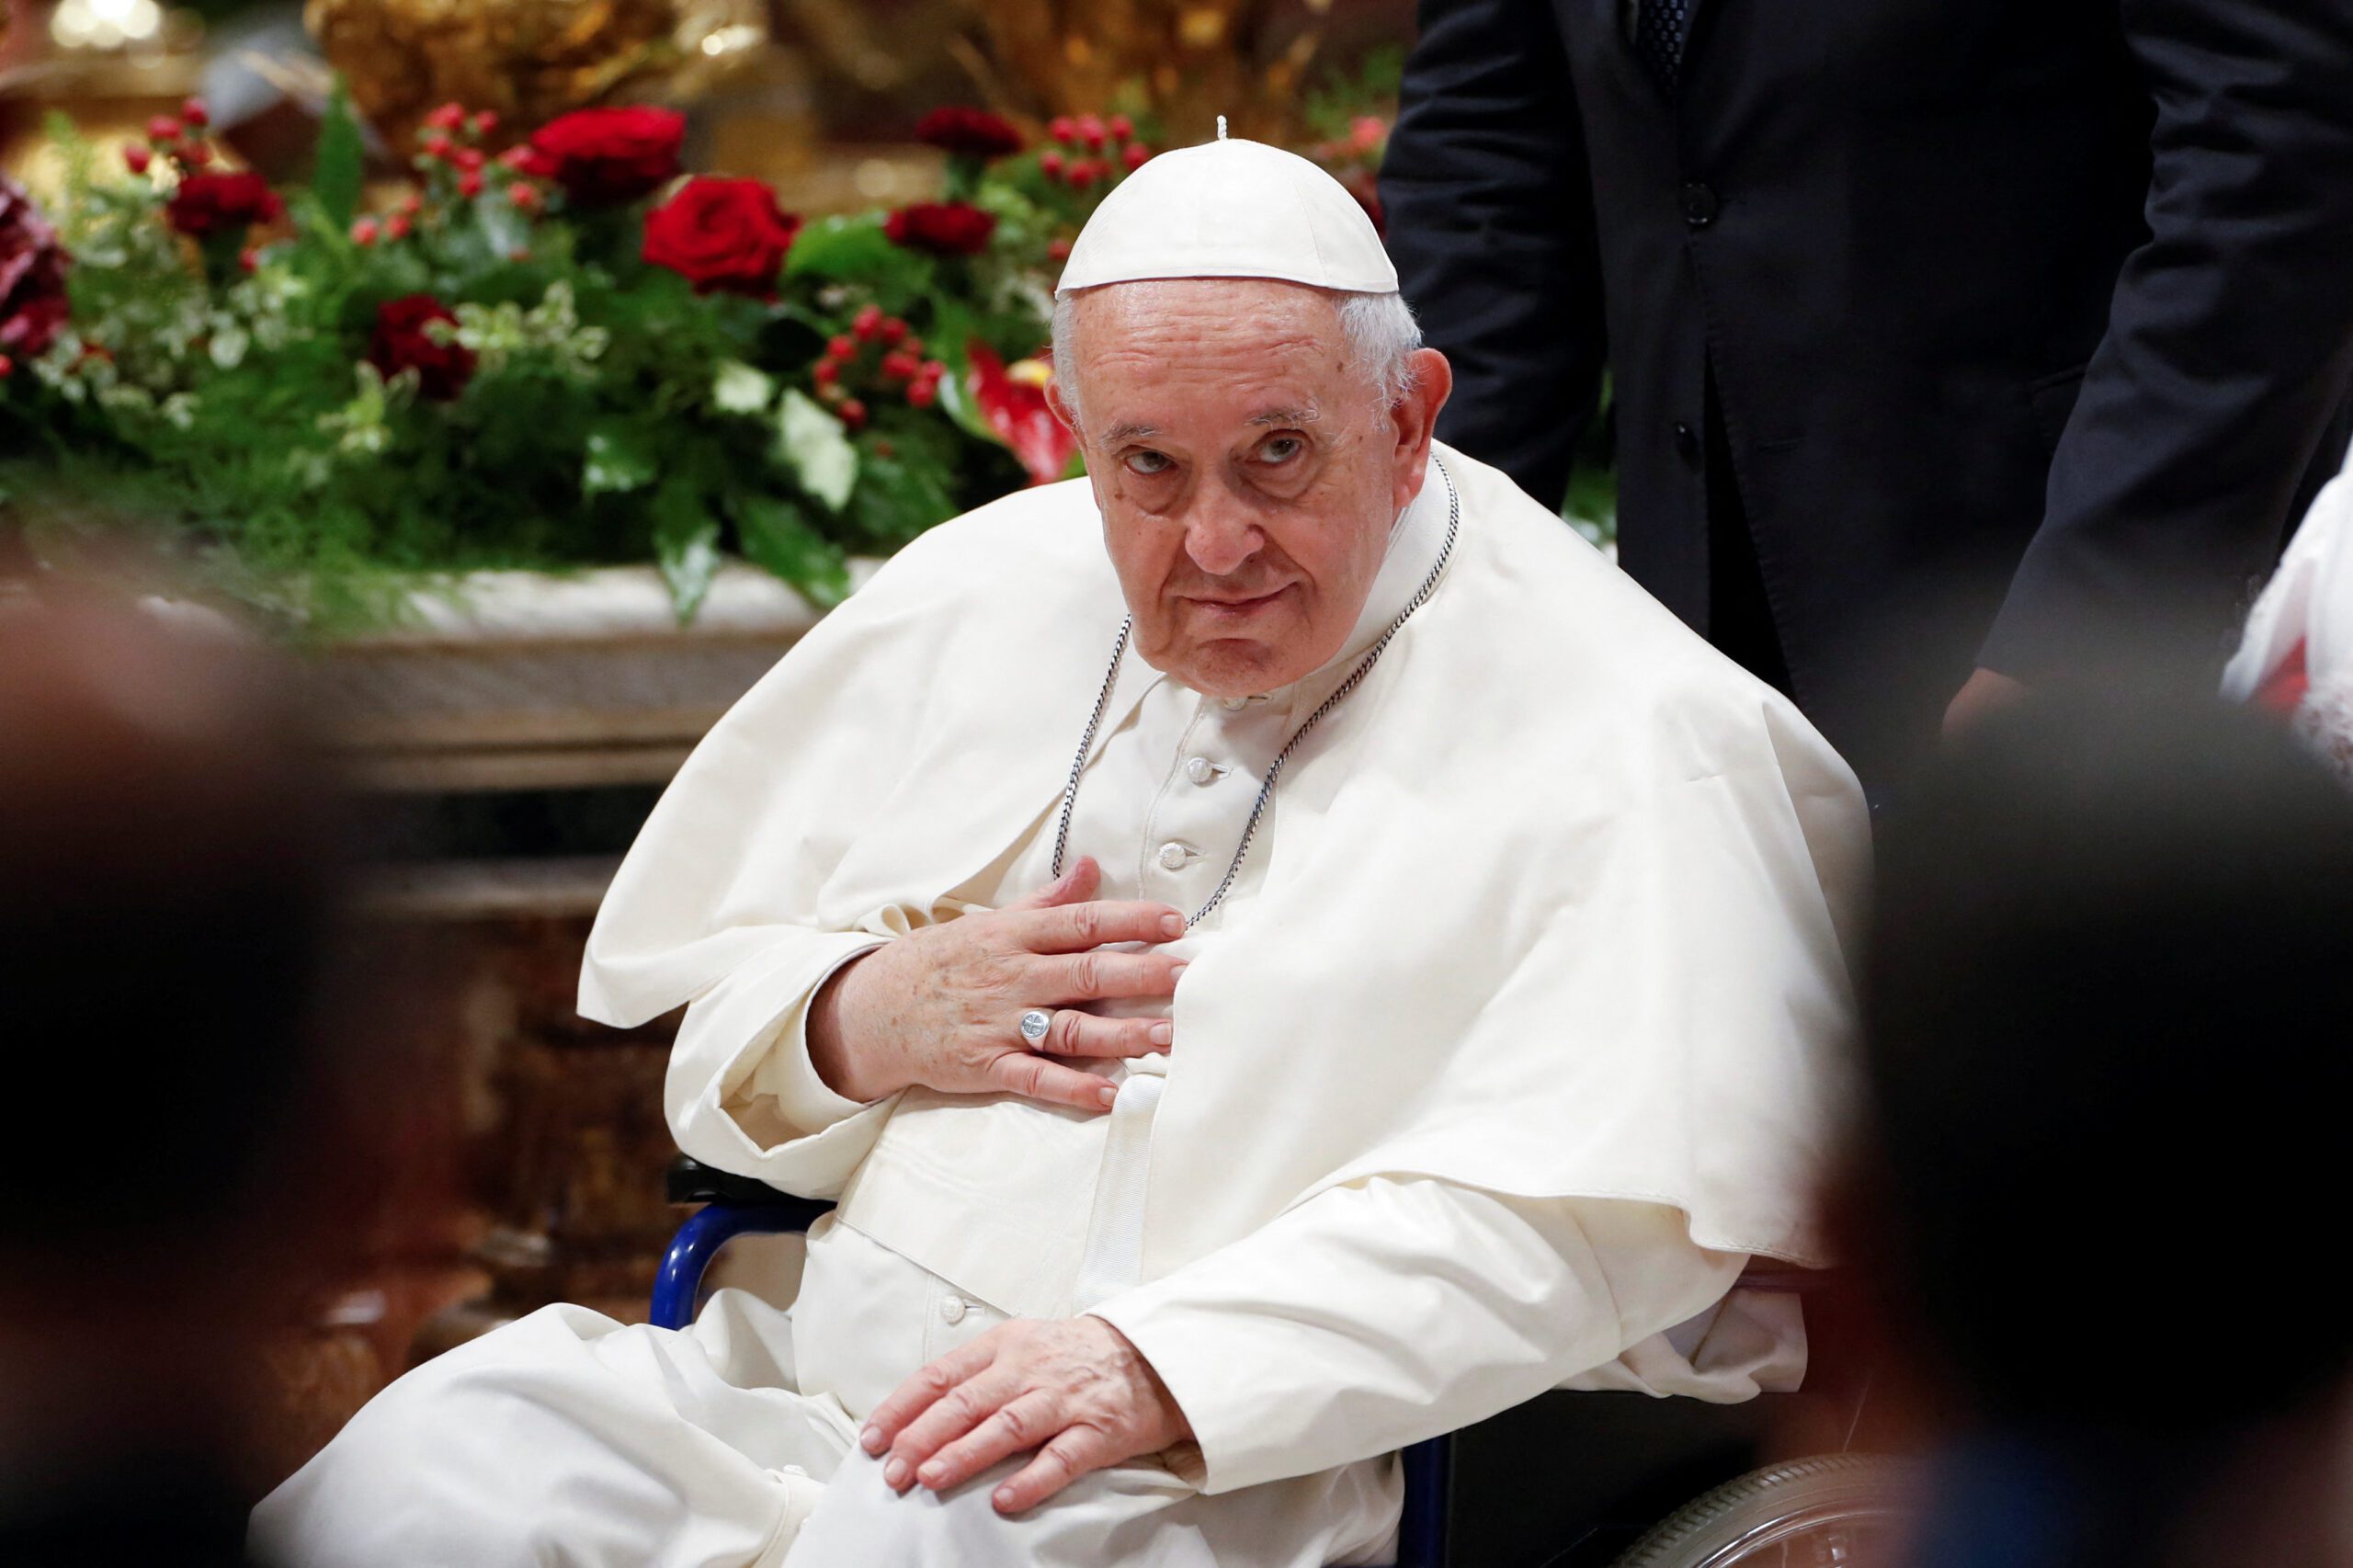 Pope implicitly accuses Russia of aggression, imperialism in Ukraine